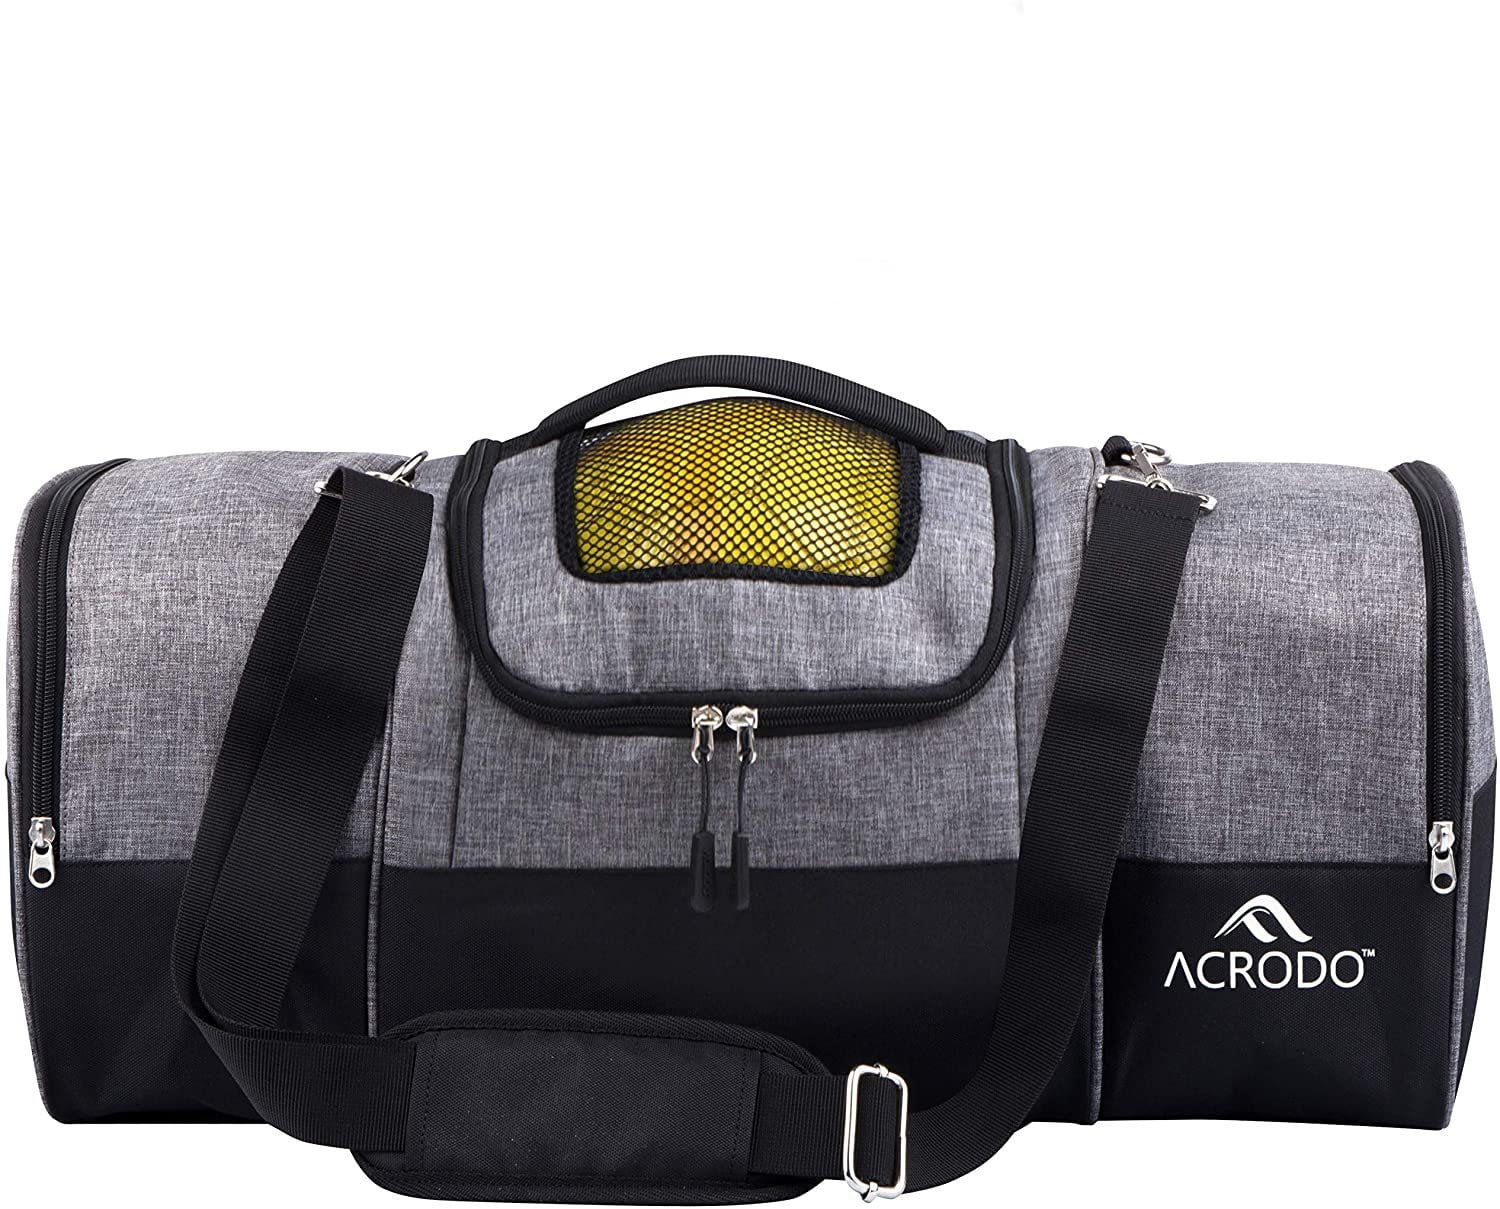 Wolf Travel Duffel Bag Luggage Sports Gym Bag With Shoes Compartment Large Capacity Lightweight Duffle Bag For Men Women